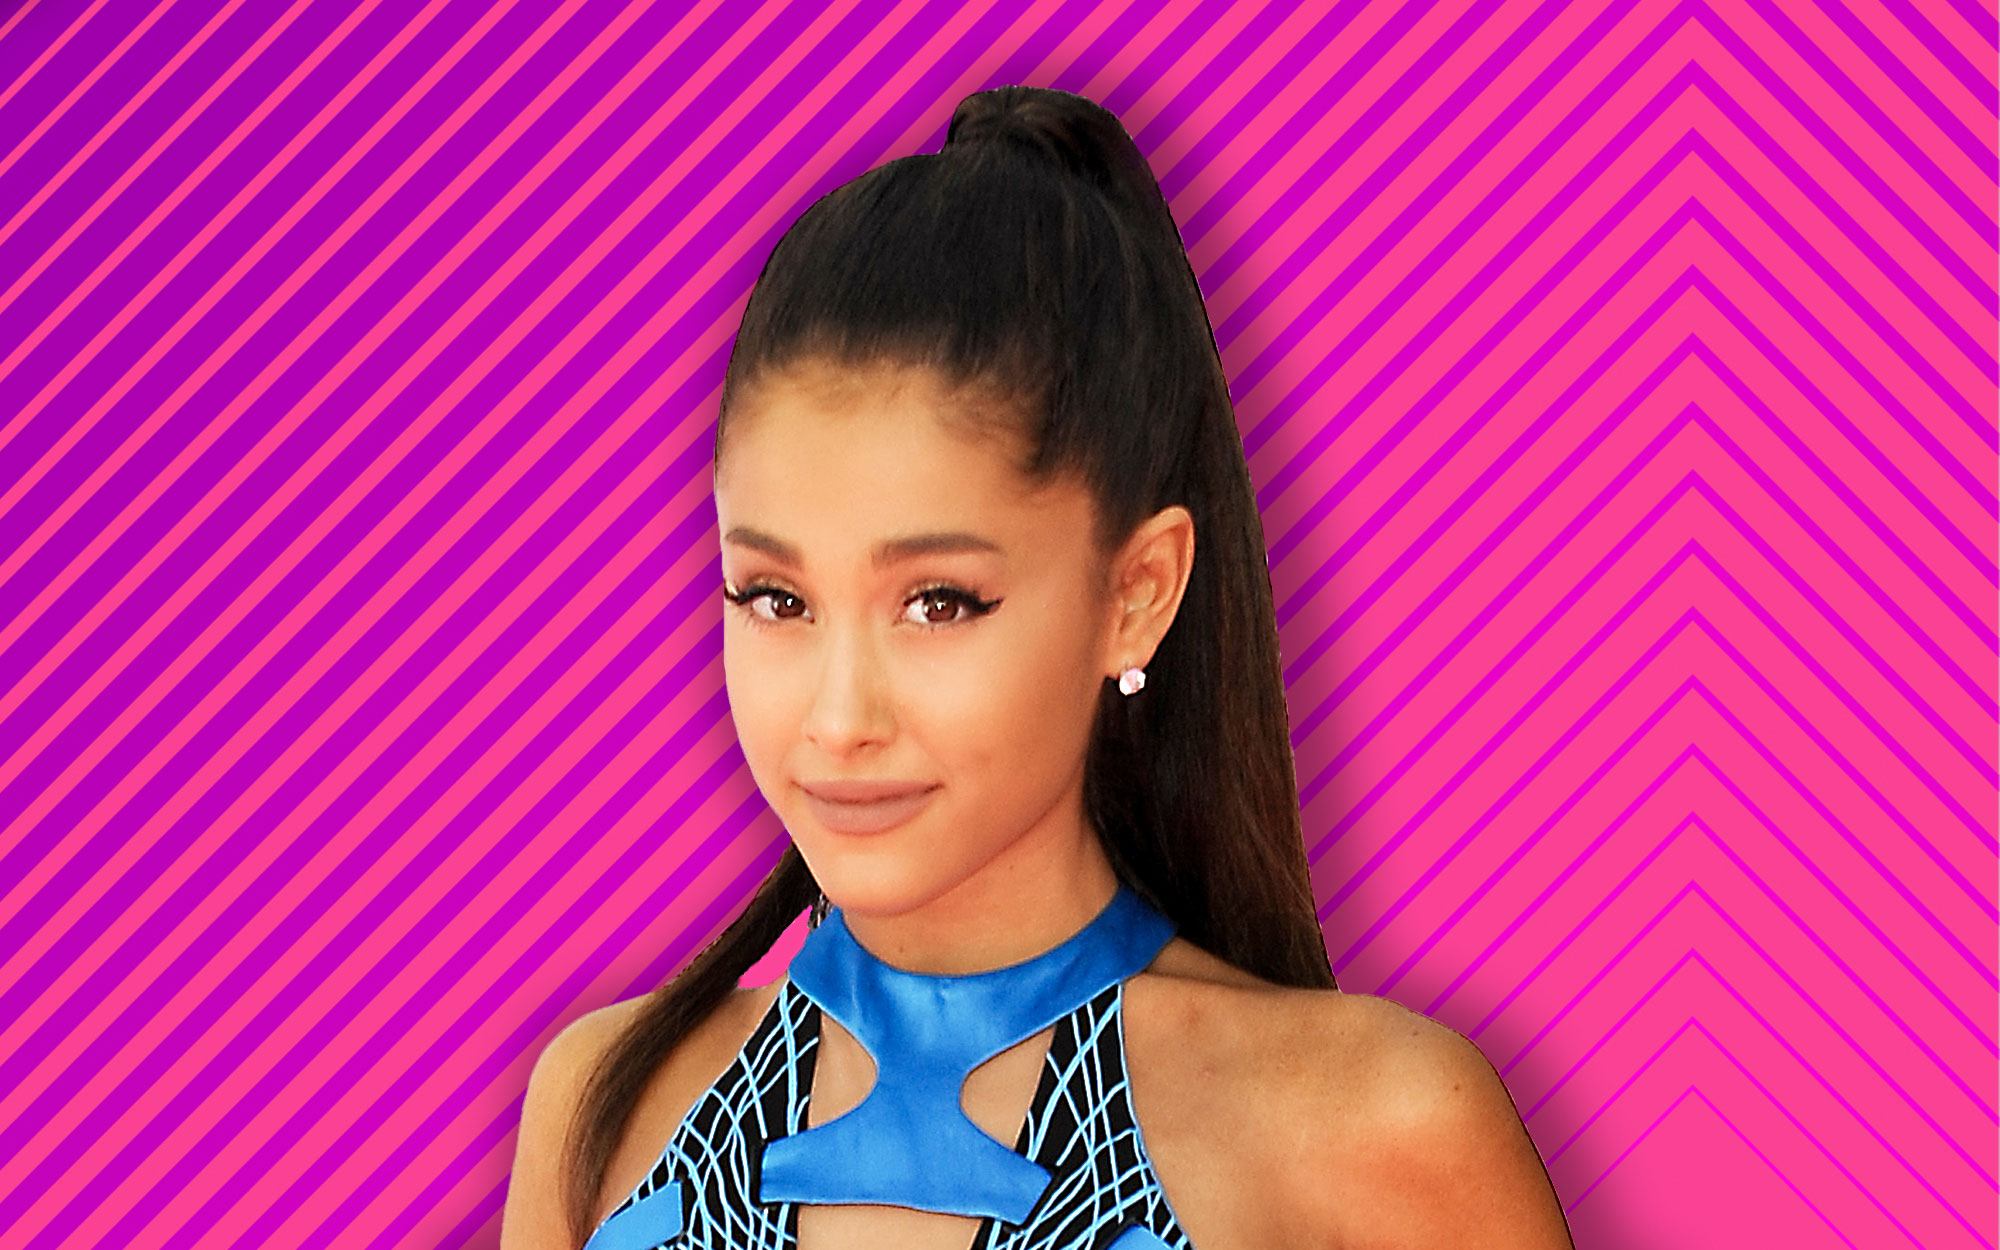 Pop Star Ariana Grande Has a Misspelled Japanese Tattoo That Means 'Charcoal Grill'